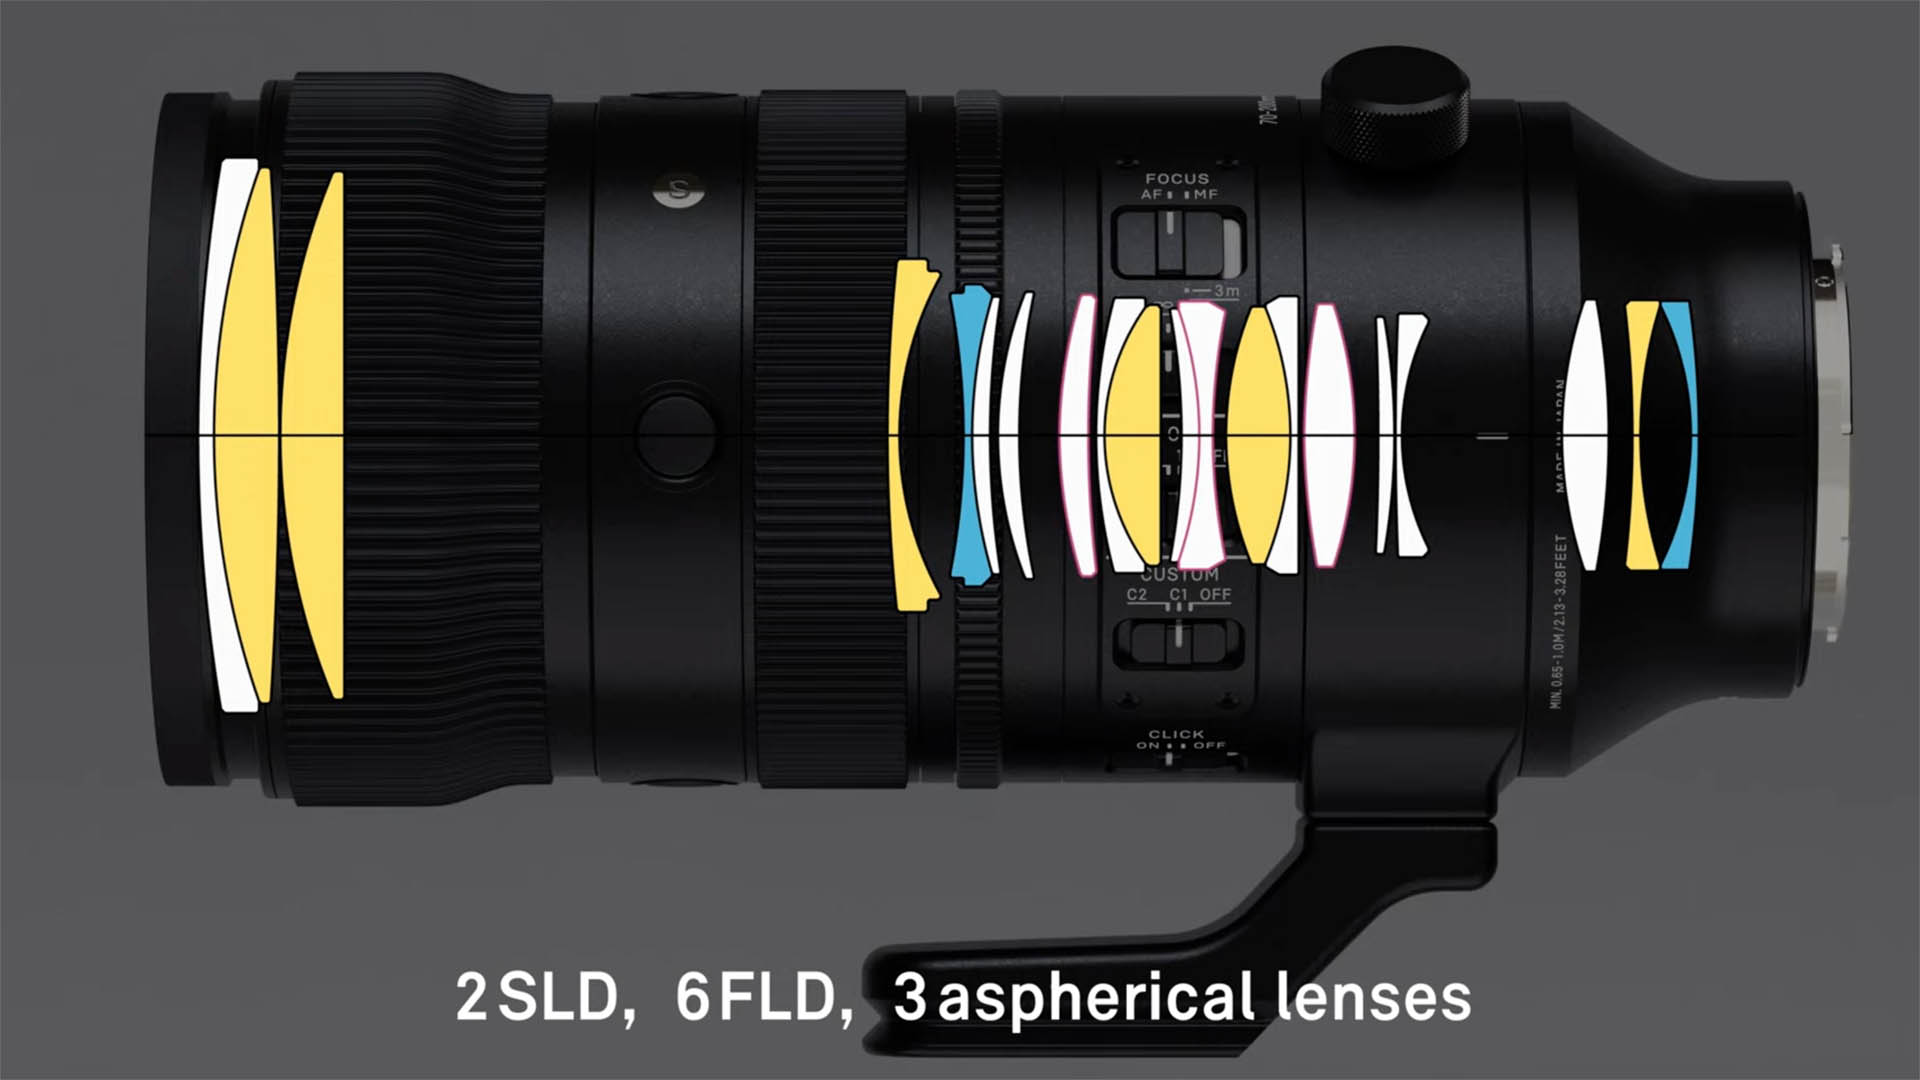 Sigma will announce a new 70-200mm f/2.8 FE lens on October 6th 